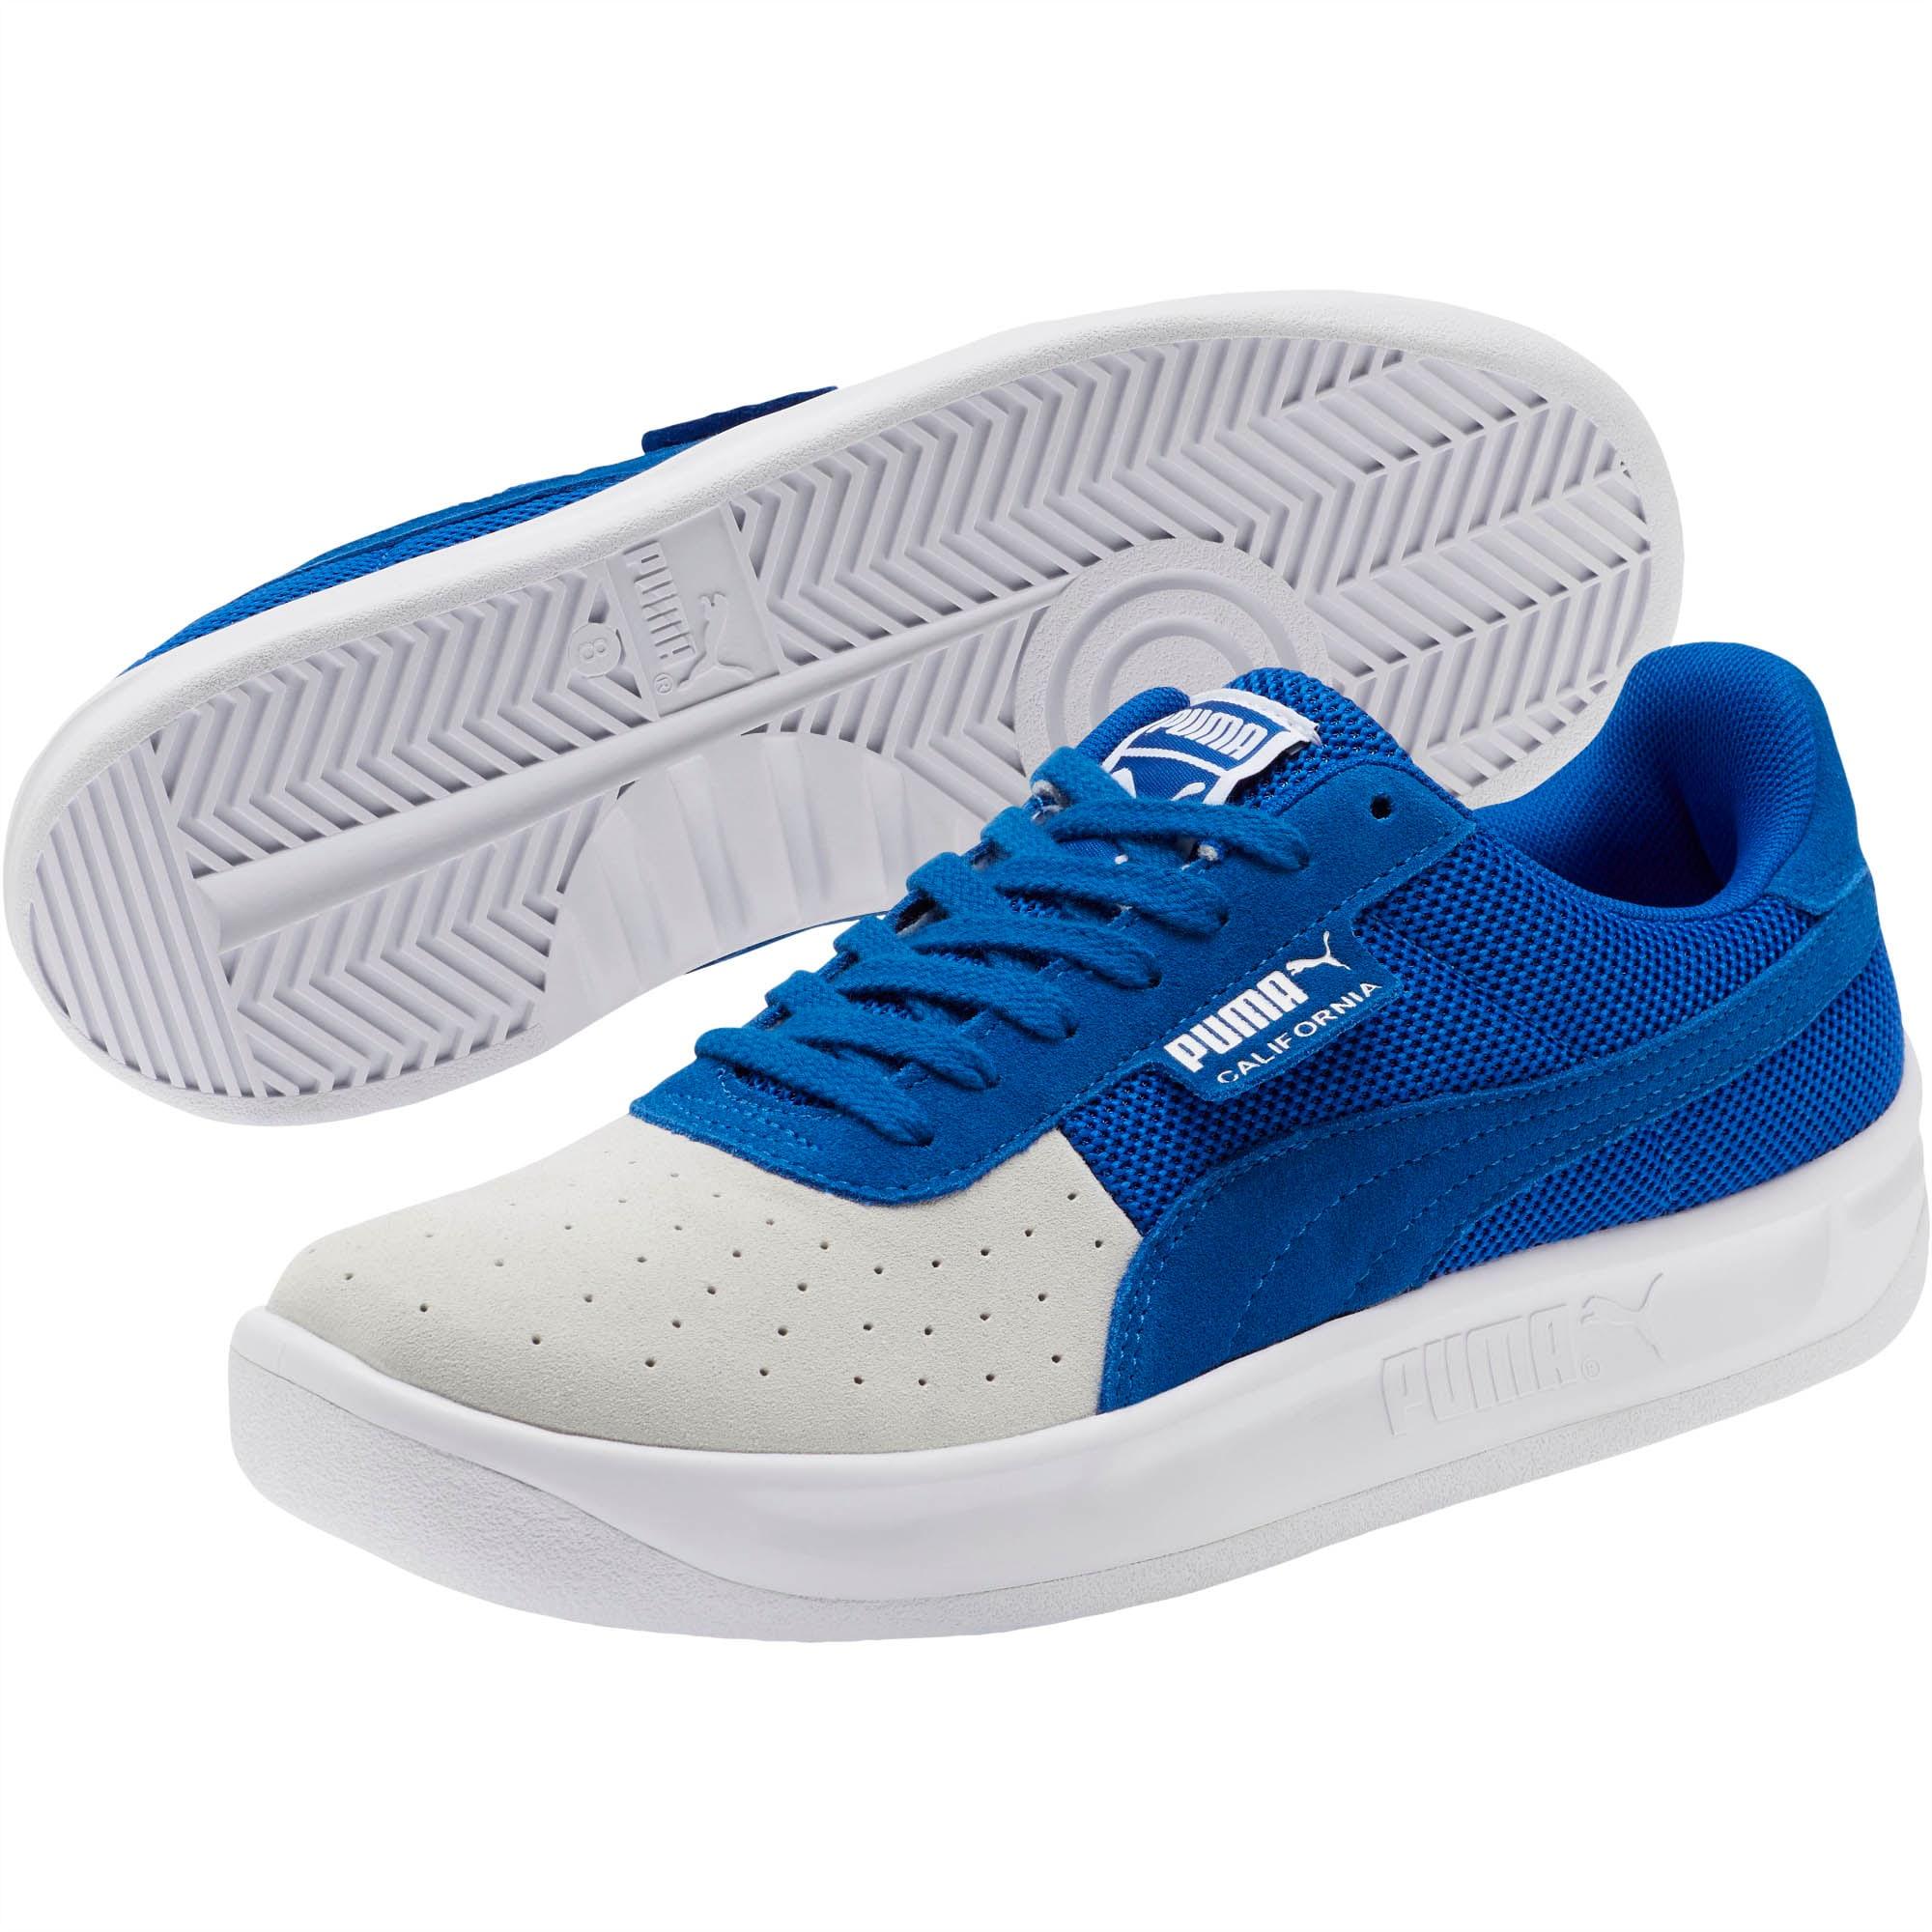 PUMA Suede California Summer Sneakers in 02 (Blue) for Men - Lyst